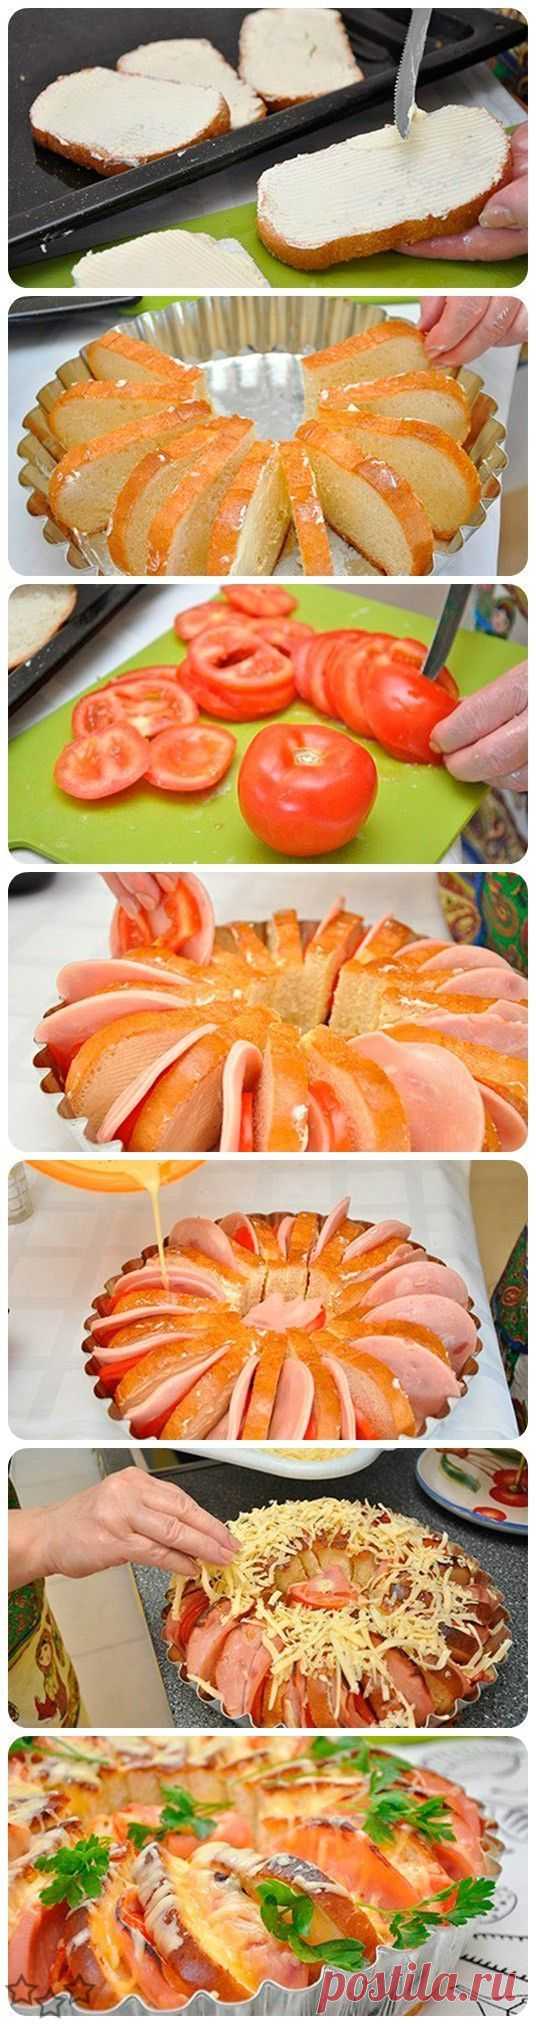 Delicious cake baked ham and fast with few ingredients . We will need: Sliced ​​bread 5 eggs 3 tomatoes 600 gr. cooked ham or palette 150 gr. butter 200 ml . milk cheese gratin salt and pepper.